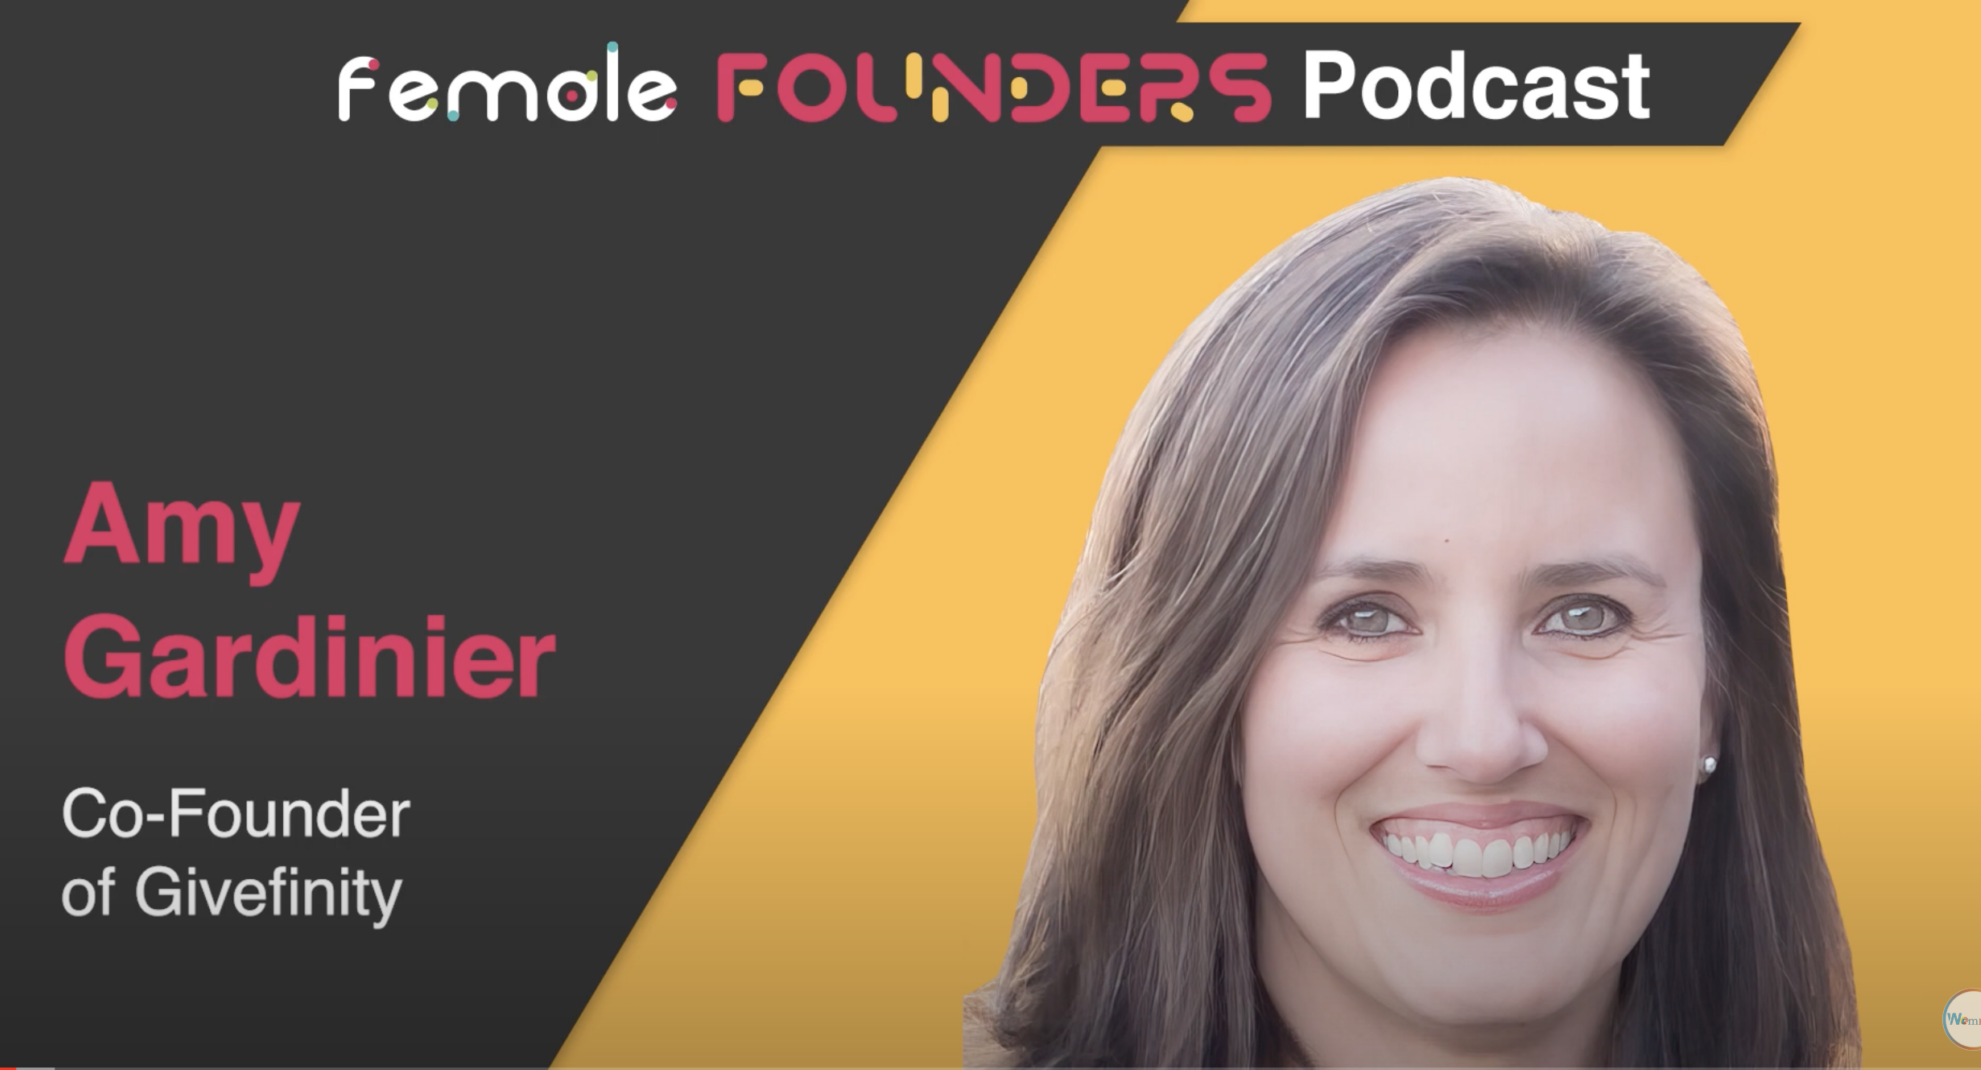 Amy Gardinier is the guest speaker on Female Founders Podcast